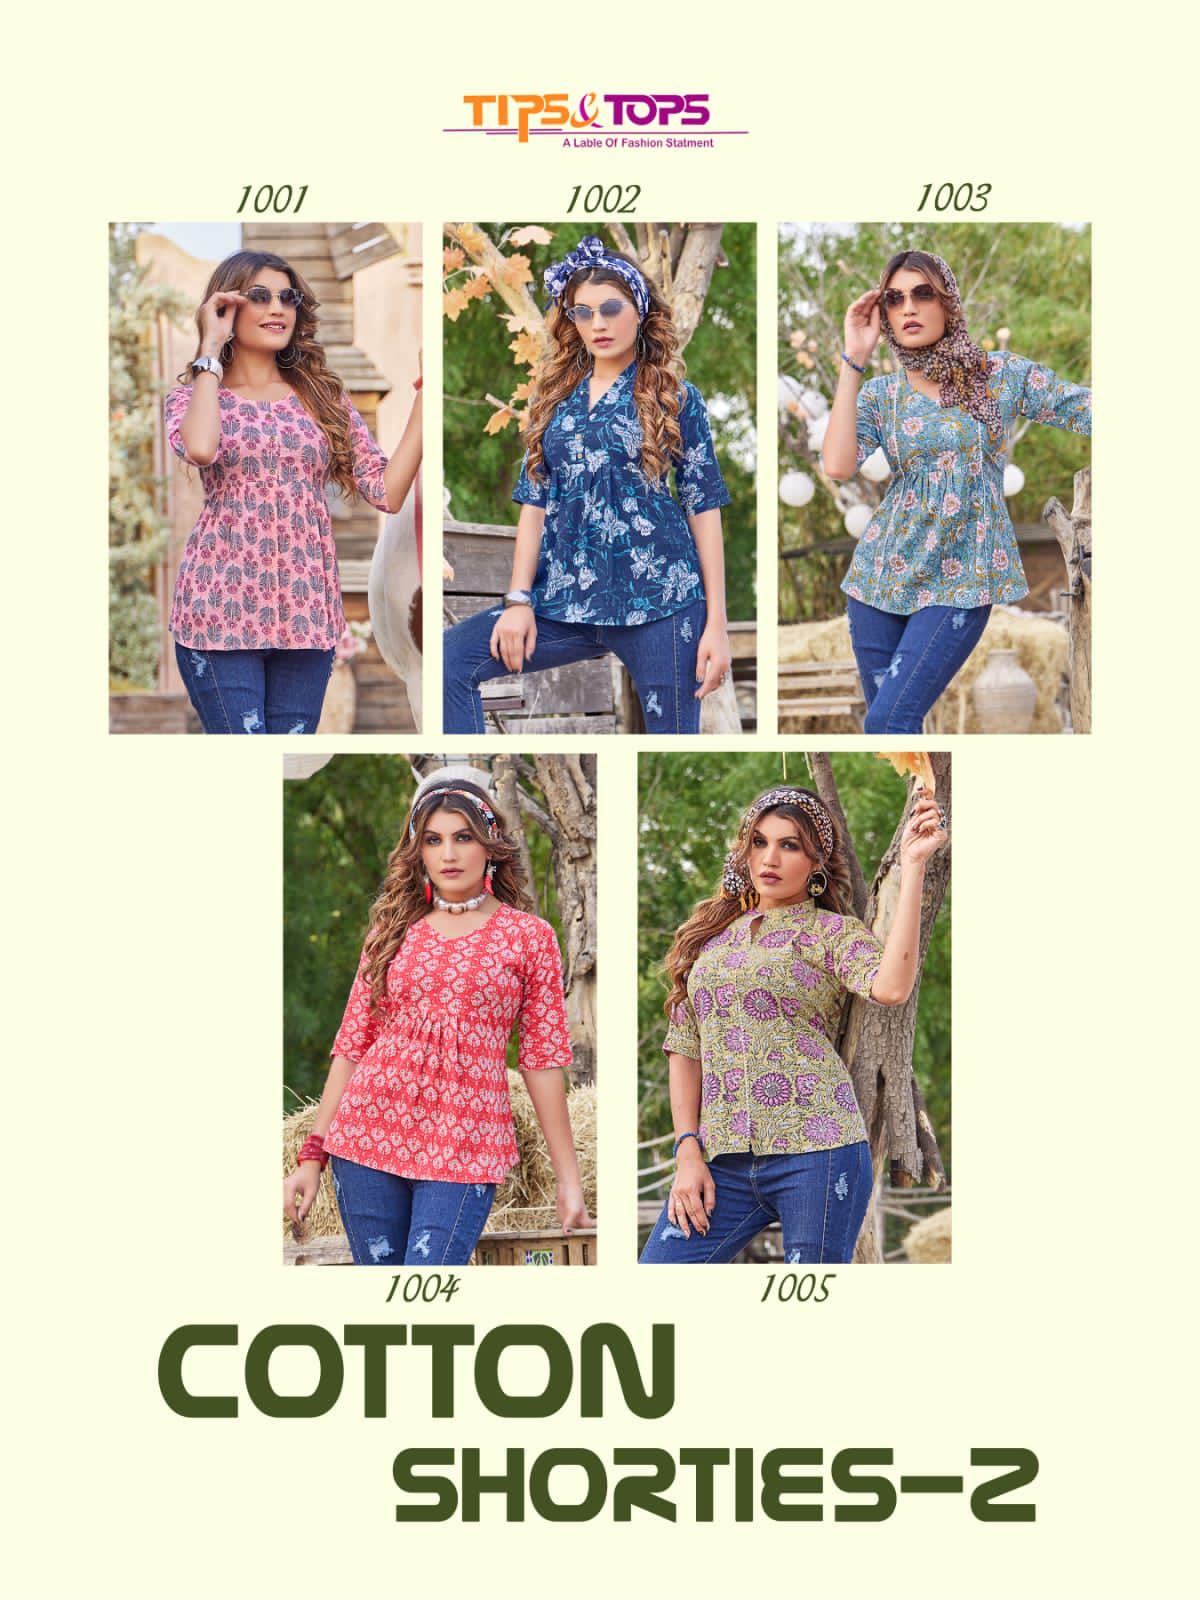 Tips And Tops Cotton Shorties 1001-1005